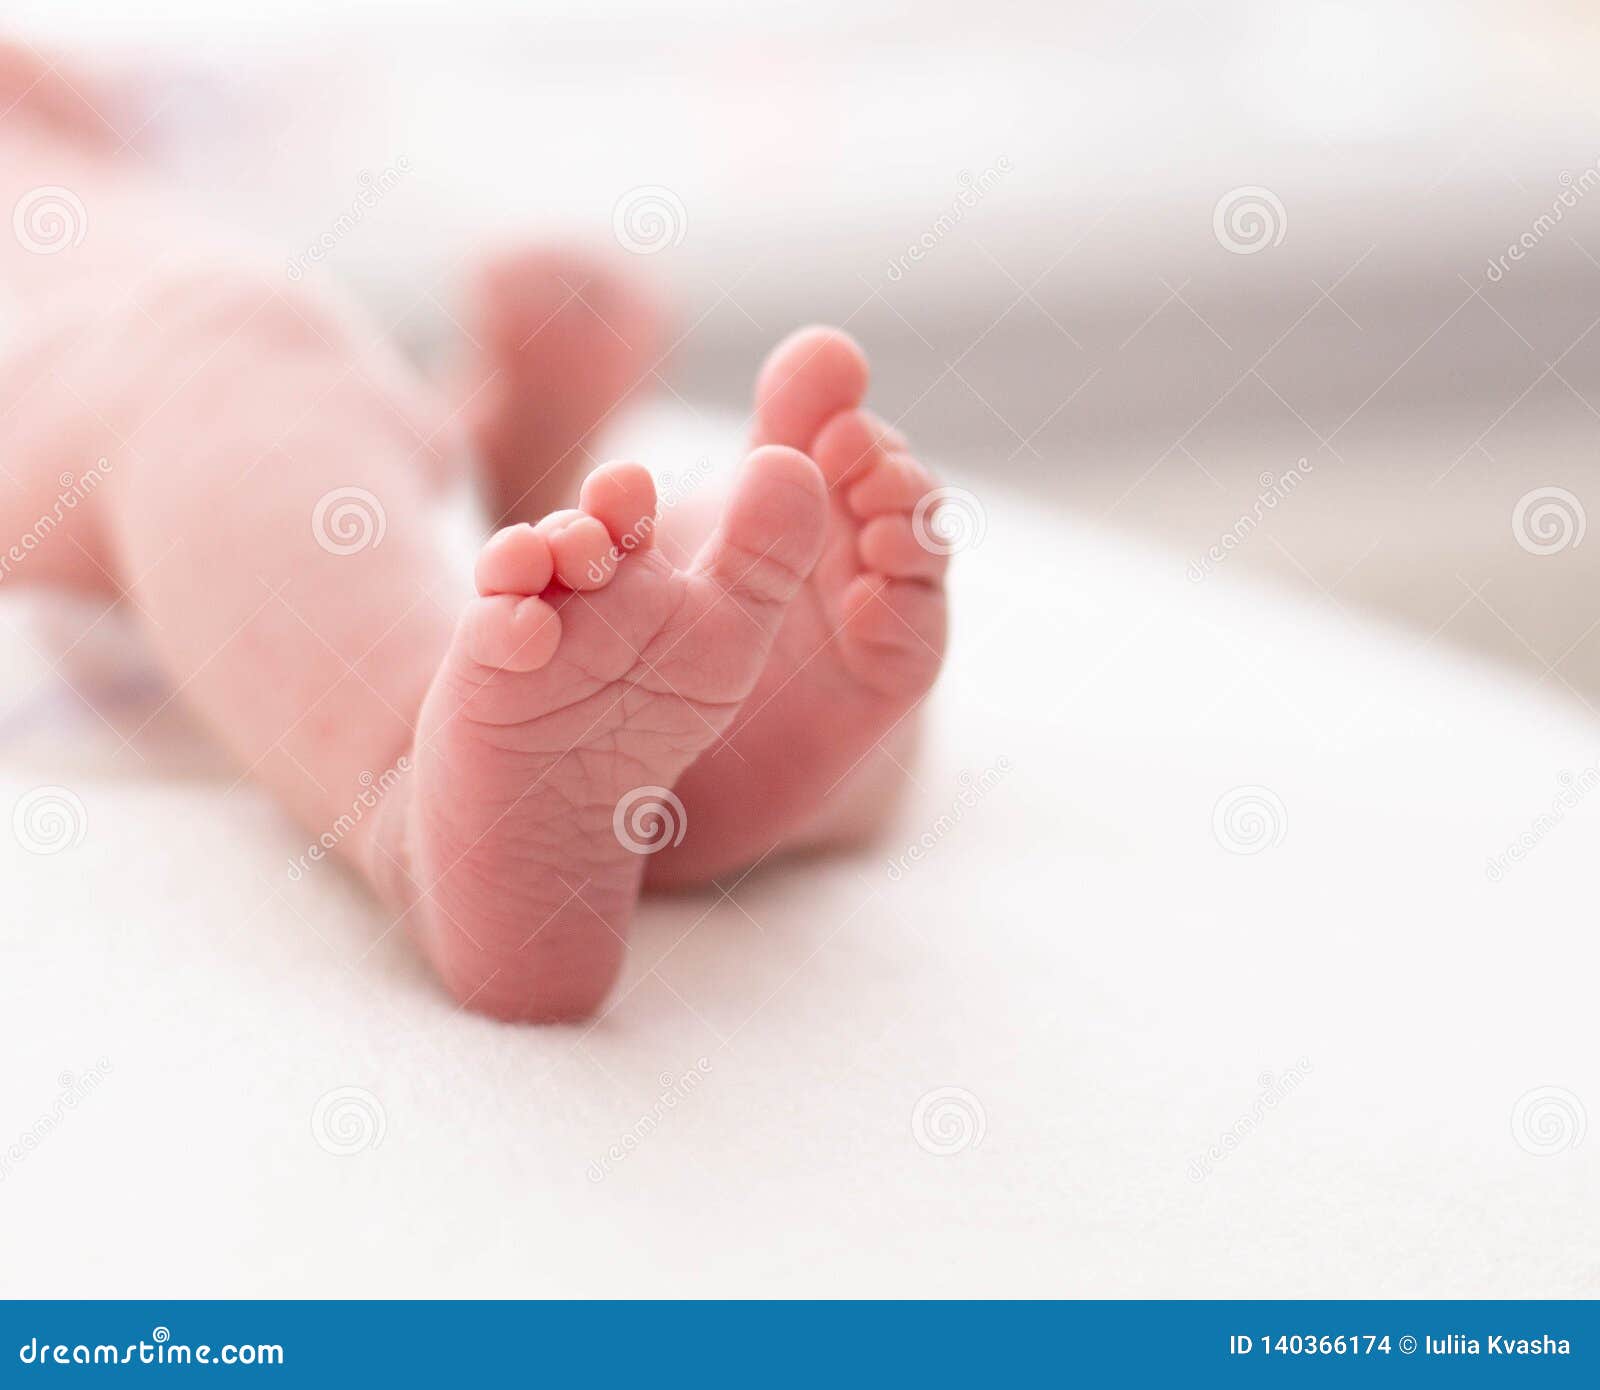 Legs Heels Newborn Baby Which Lies Incubator Delivery Room Maternity Stock  Photo by ©funfamilyfoto 563896234